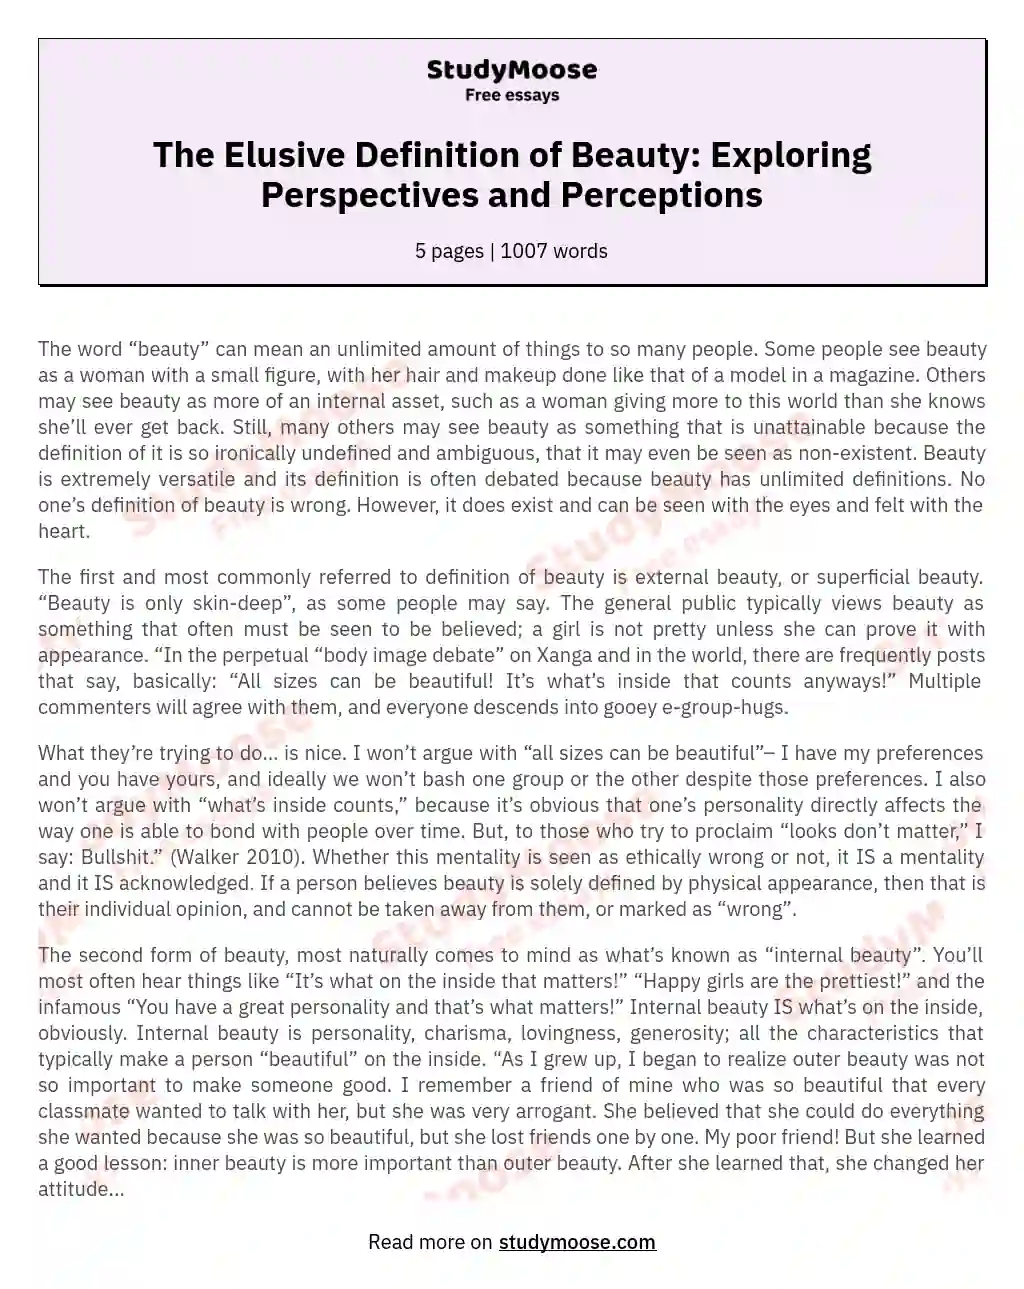 The Elusive Definition of Beauty: Exploring Perspectives and Perceptions essay